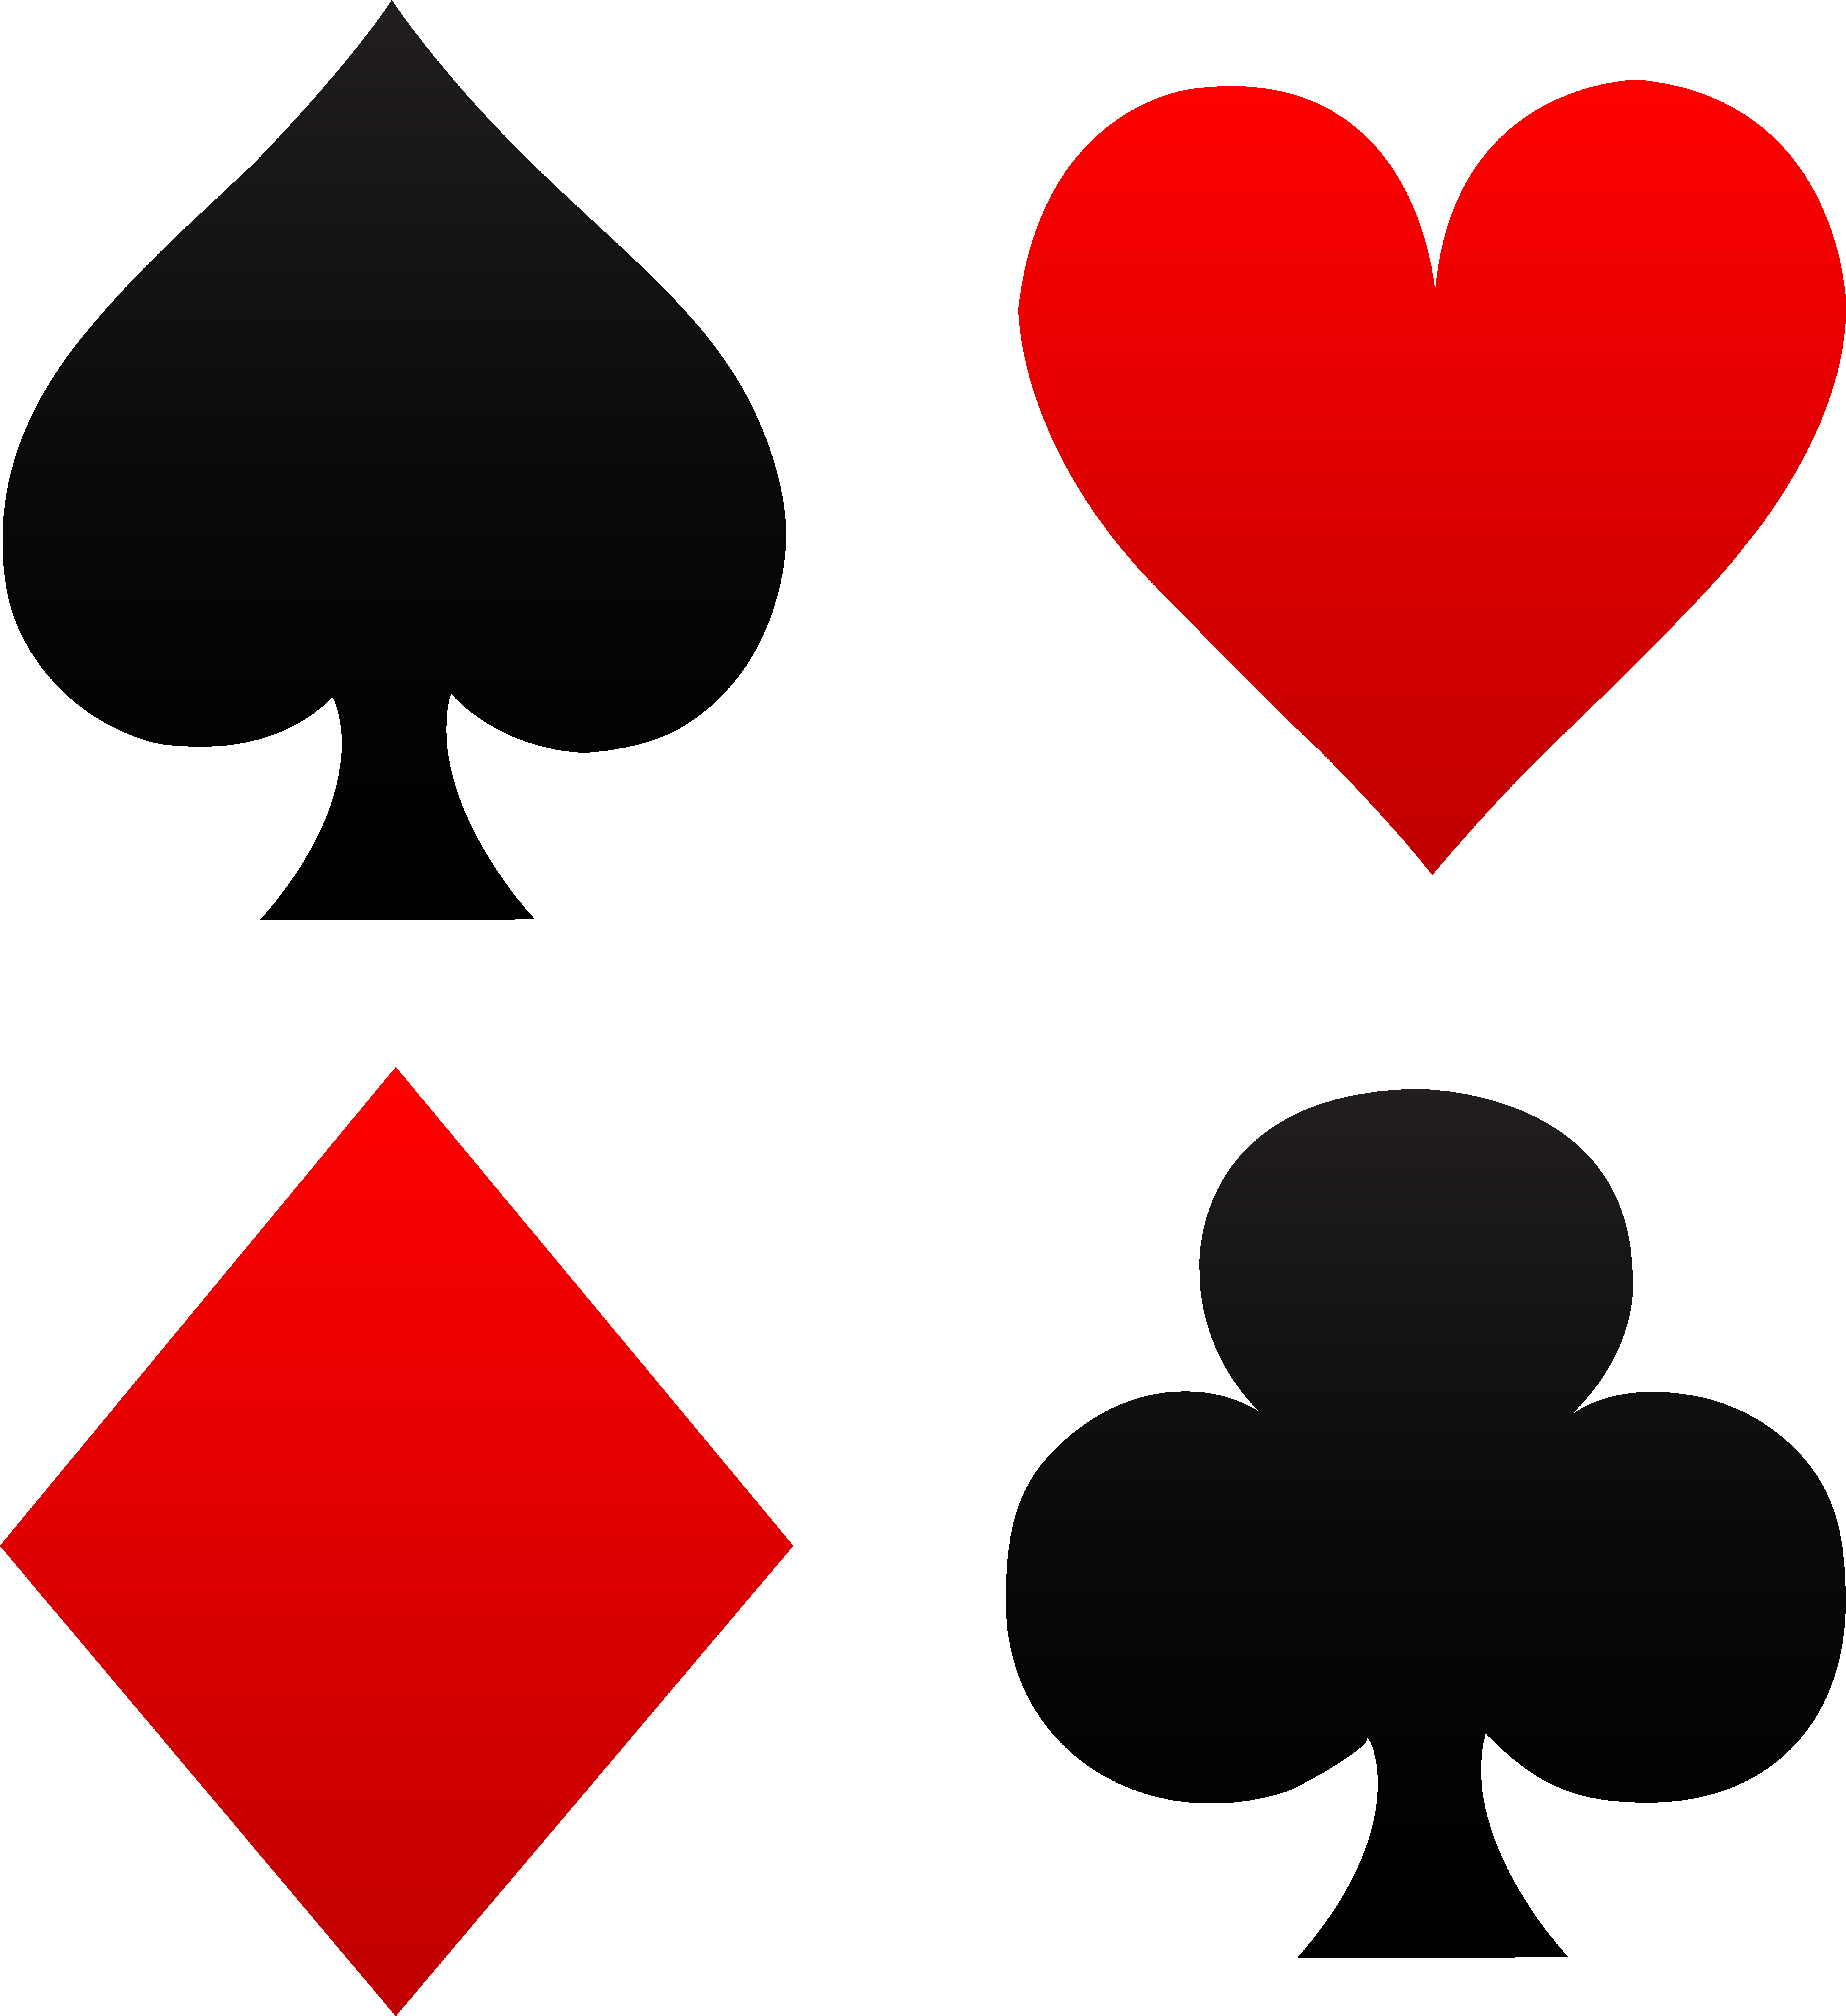 Playing Cards Club Images - ClipArt Best